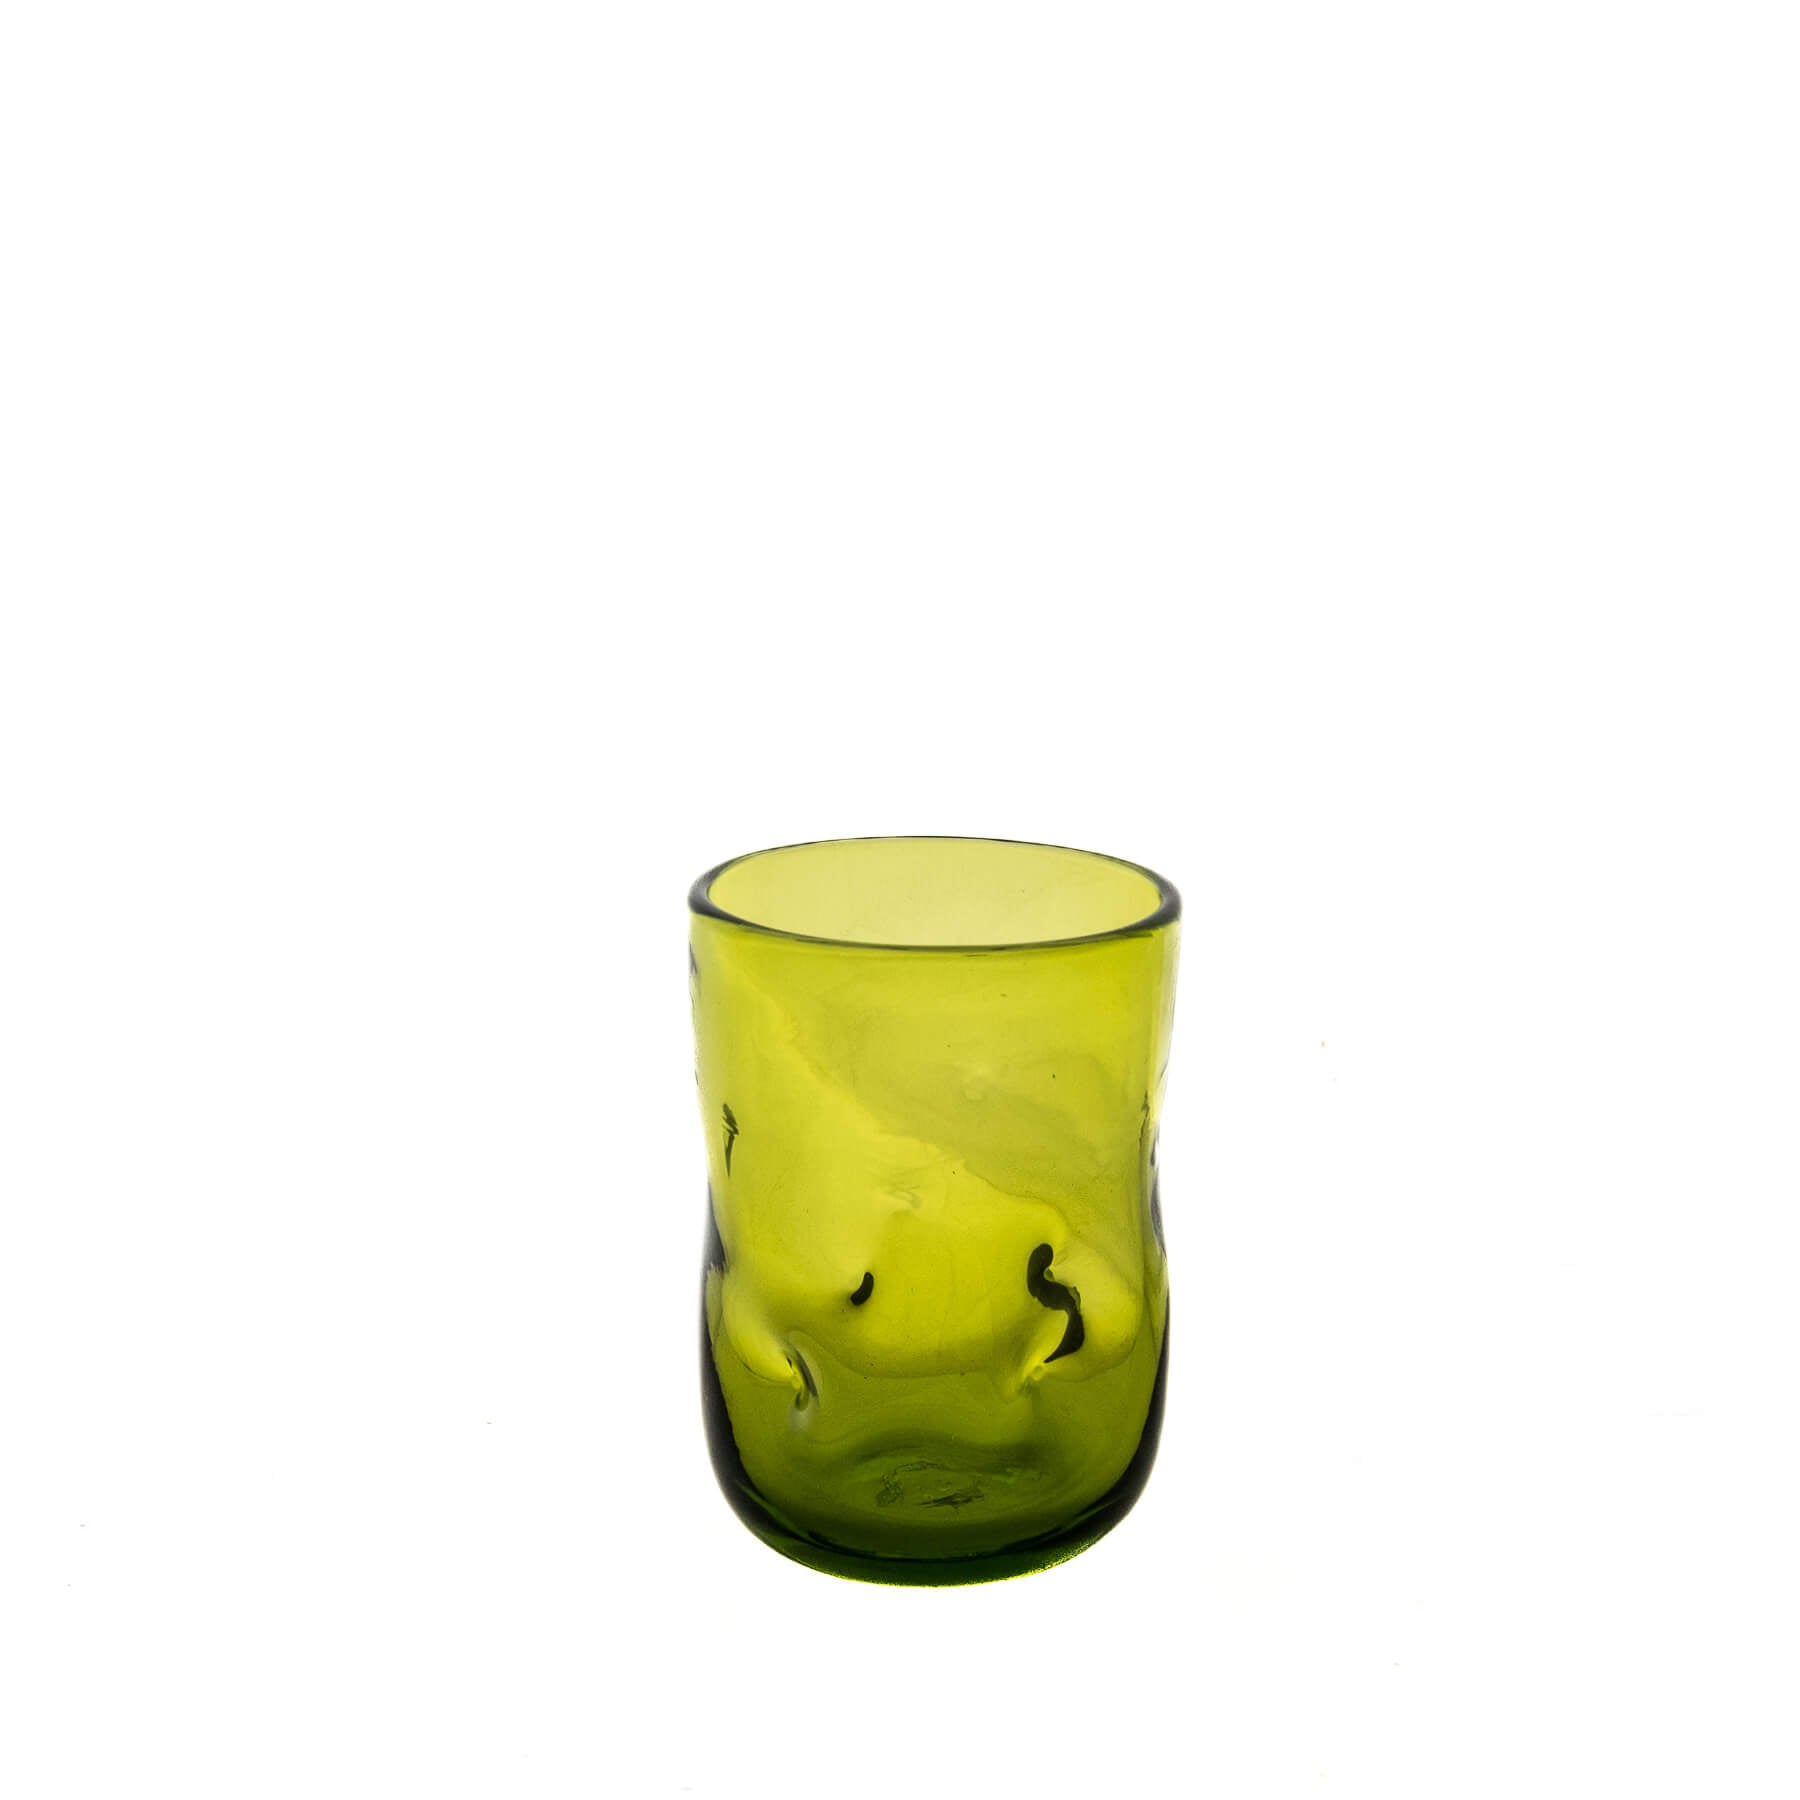 Product photo for Blenko 418S Small Dimple Glass - Olive